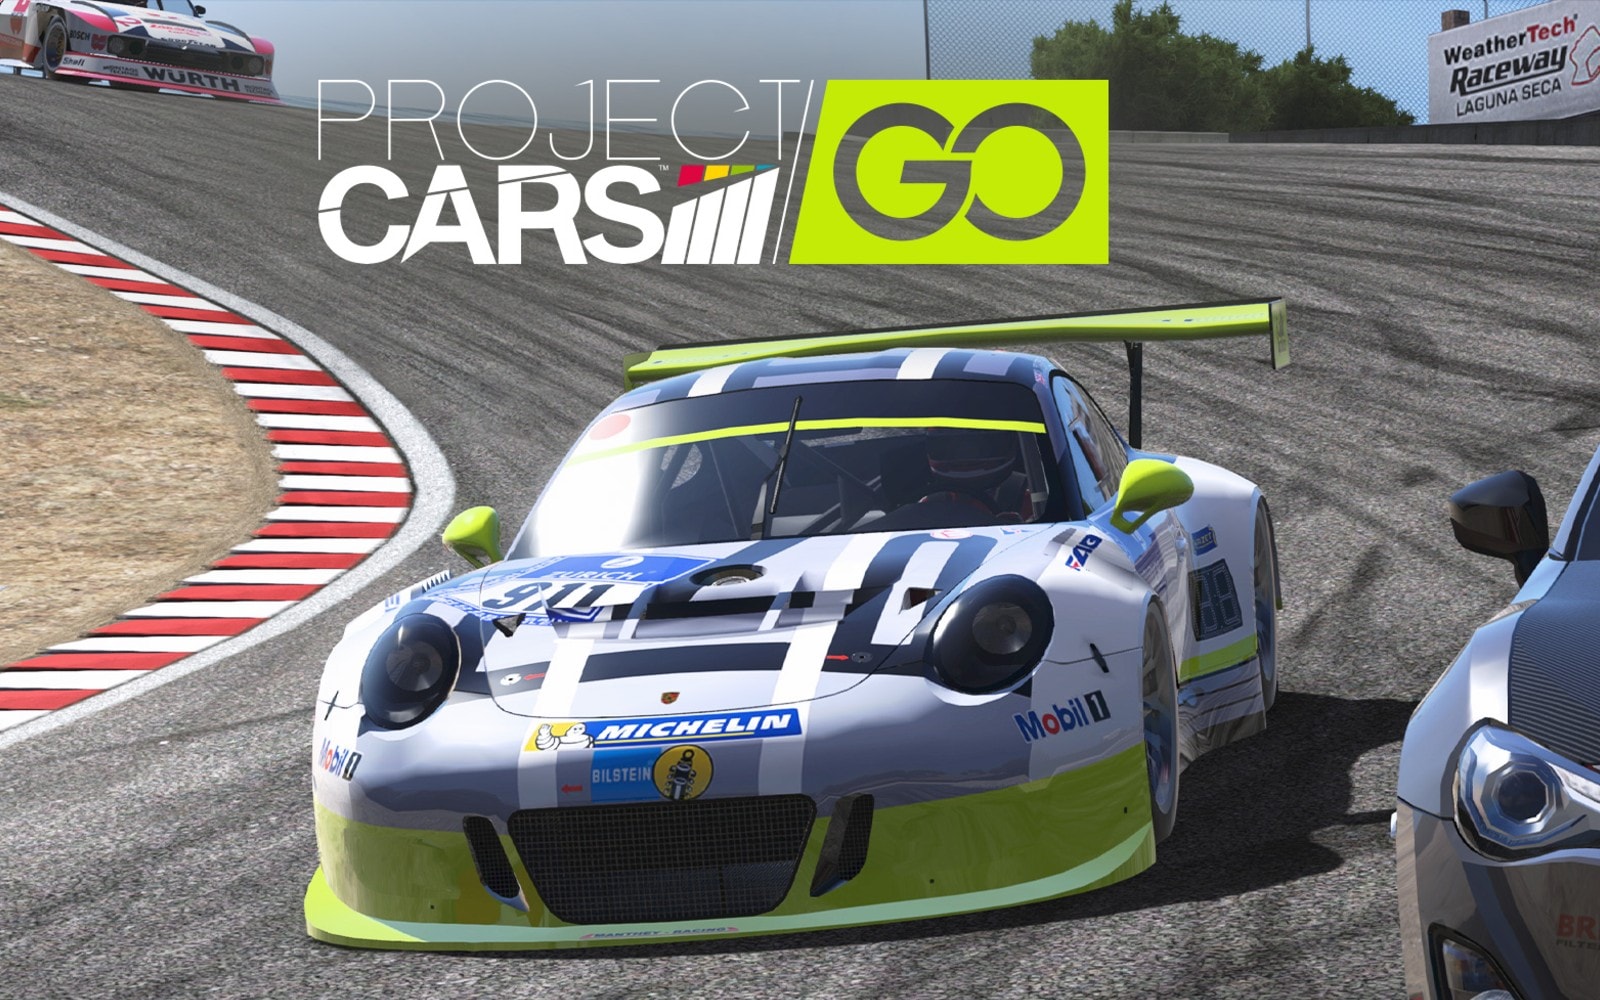 RIP Project Cars GO, Servers Shut Down After Less Than a Year